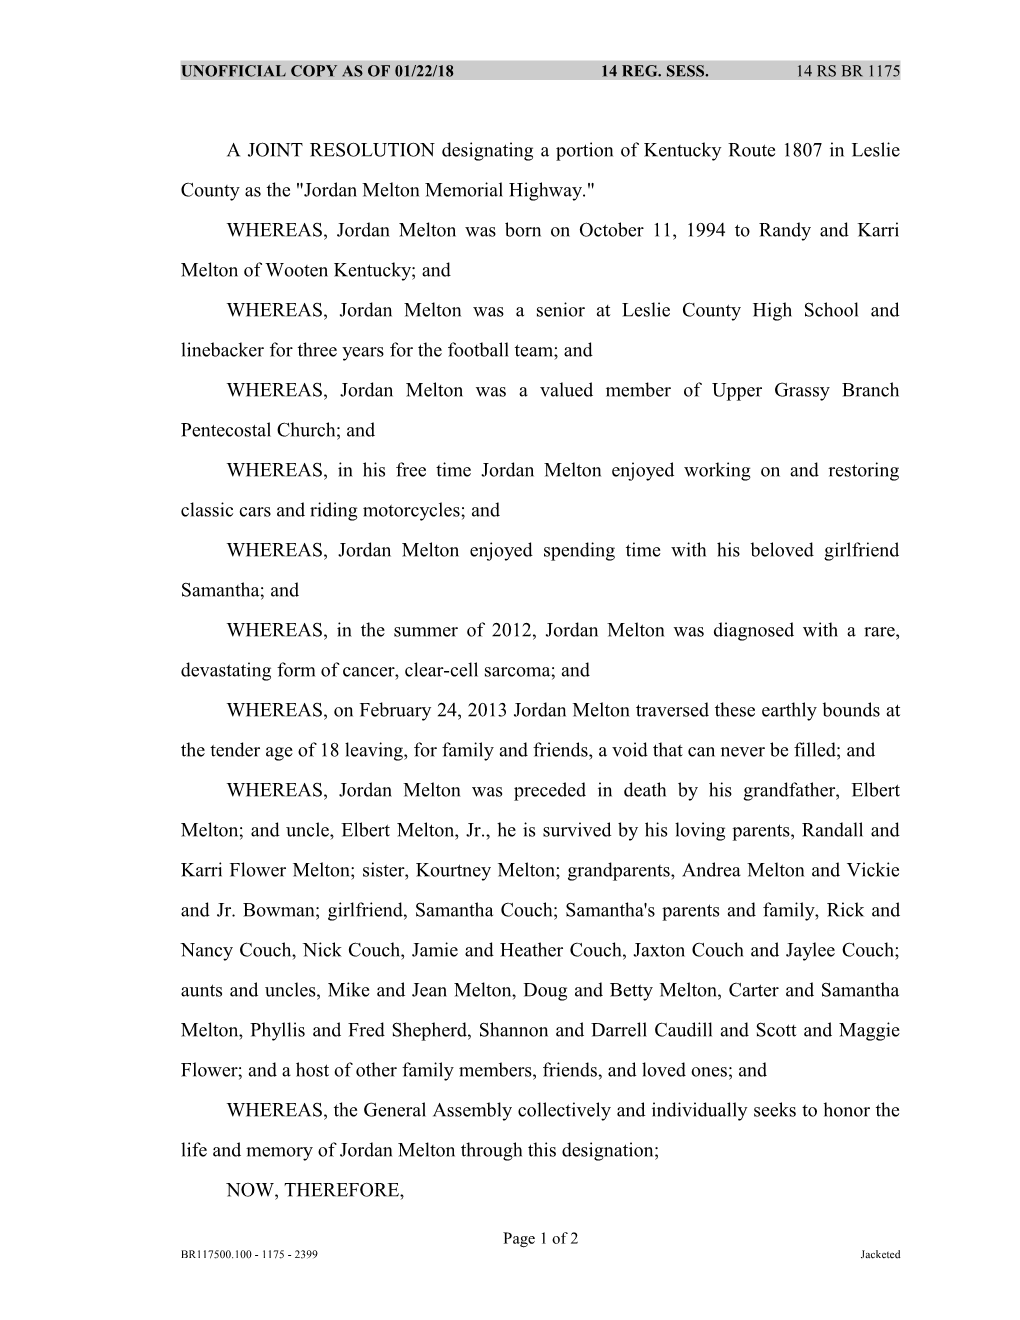 A JOINT RESOLUTION Designating a Portion of Kentucky Route 1807 in Leslie County As The